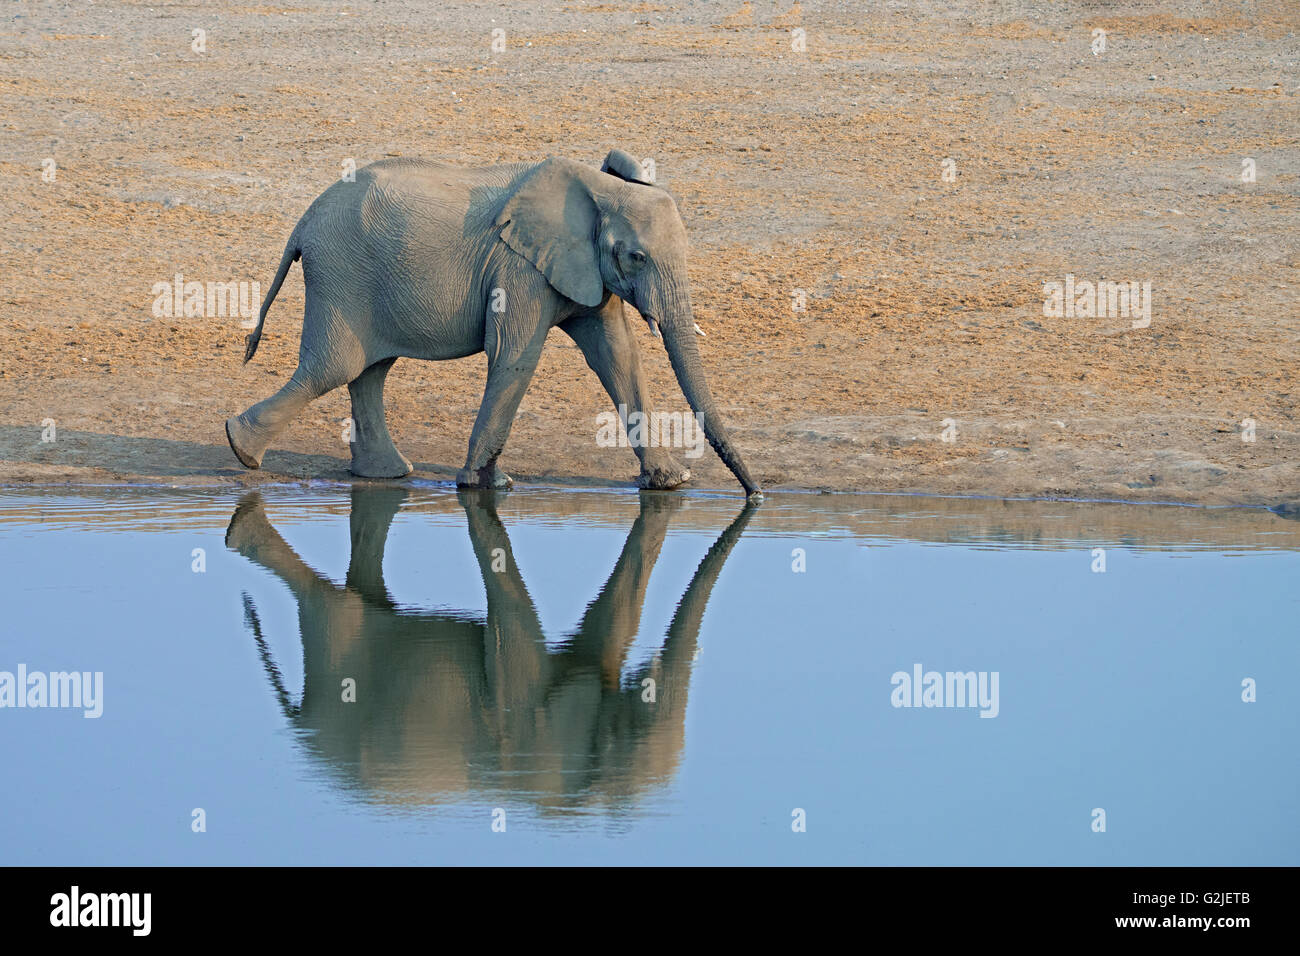 African elephant (Loxodonta africana) family coming to a waterhole to drink, Etosha National Park, Namibia, southern Africa Stock Photo